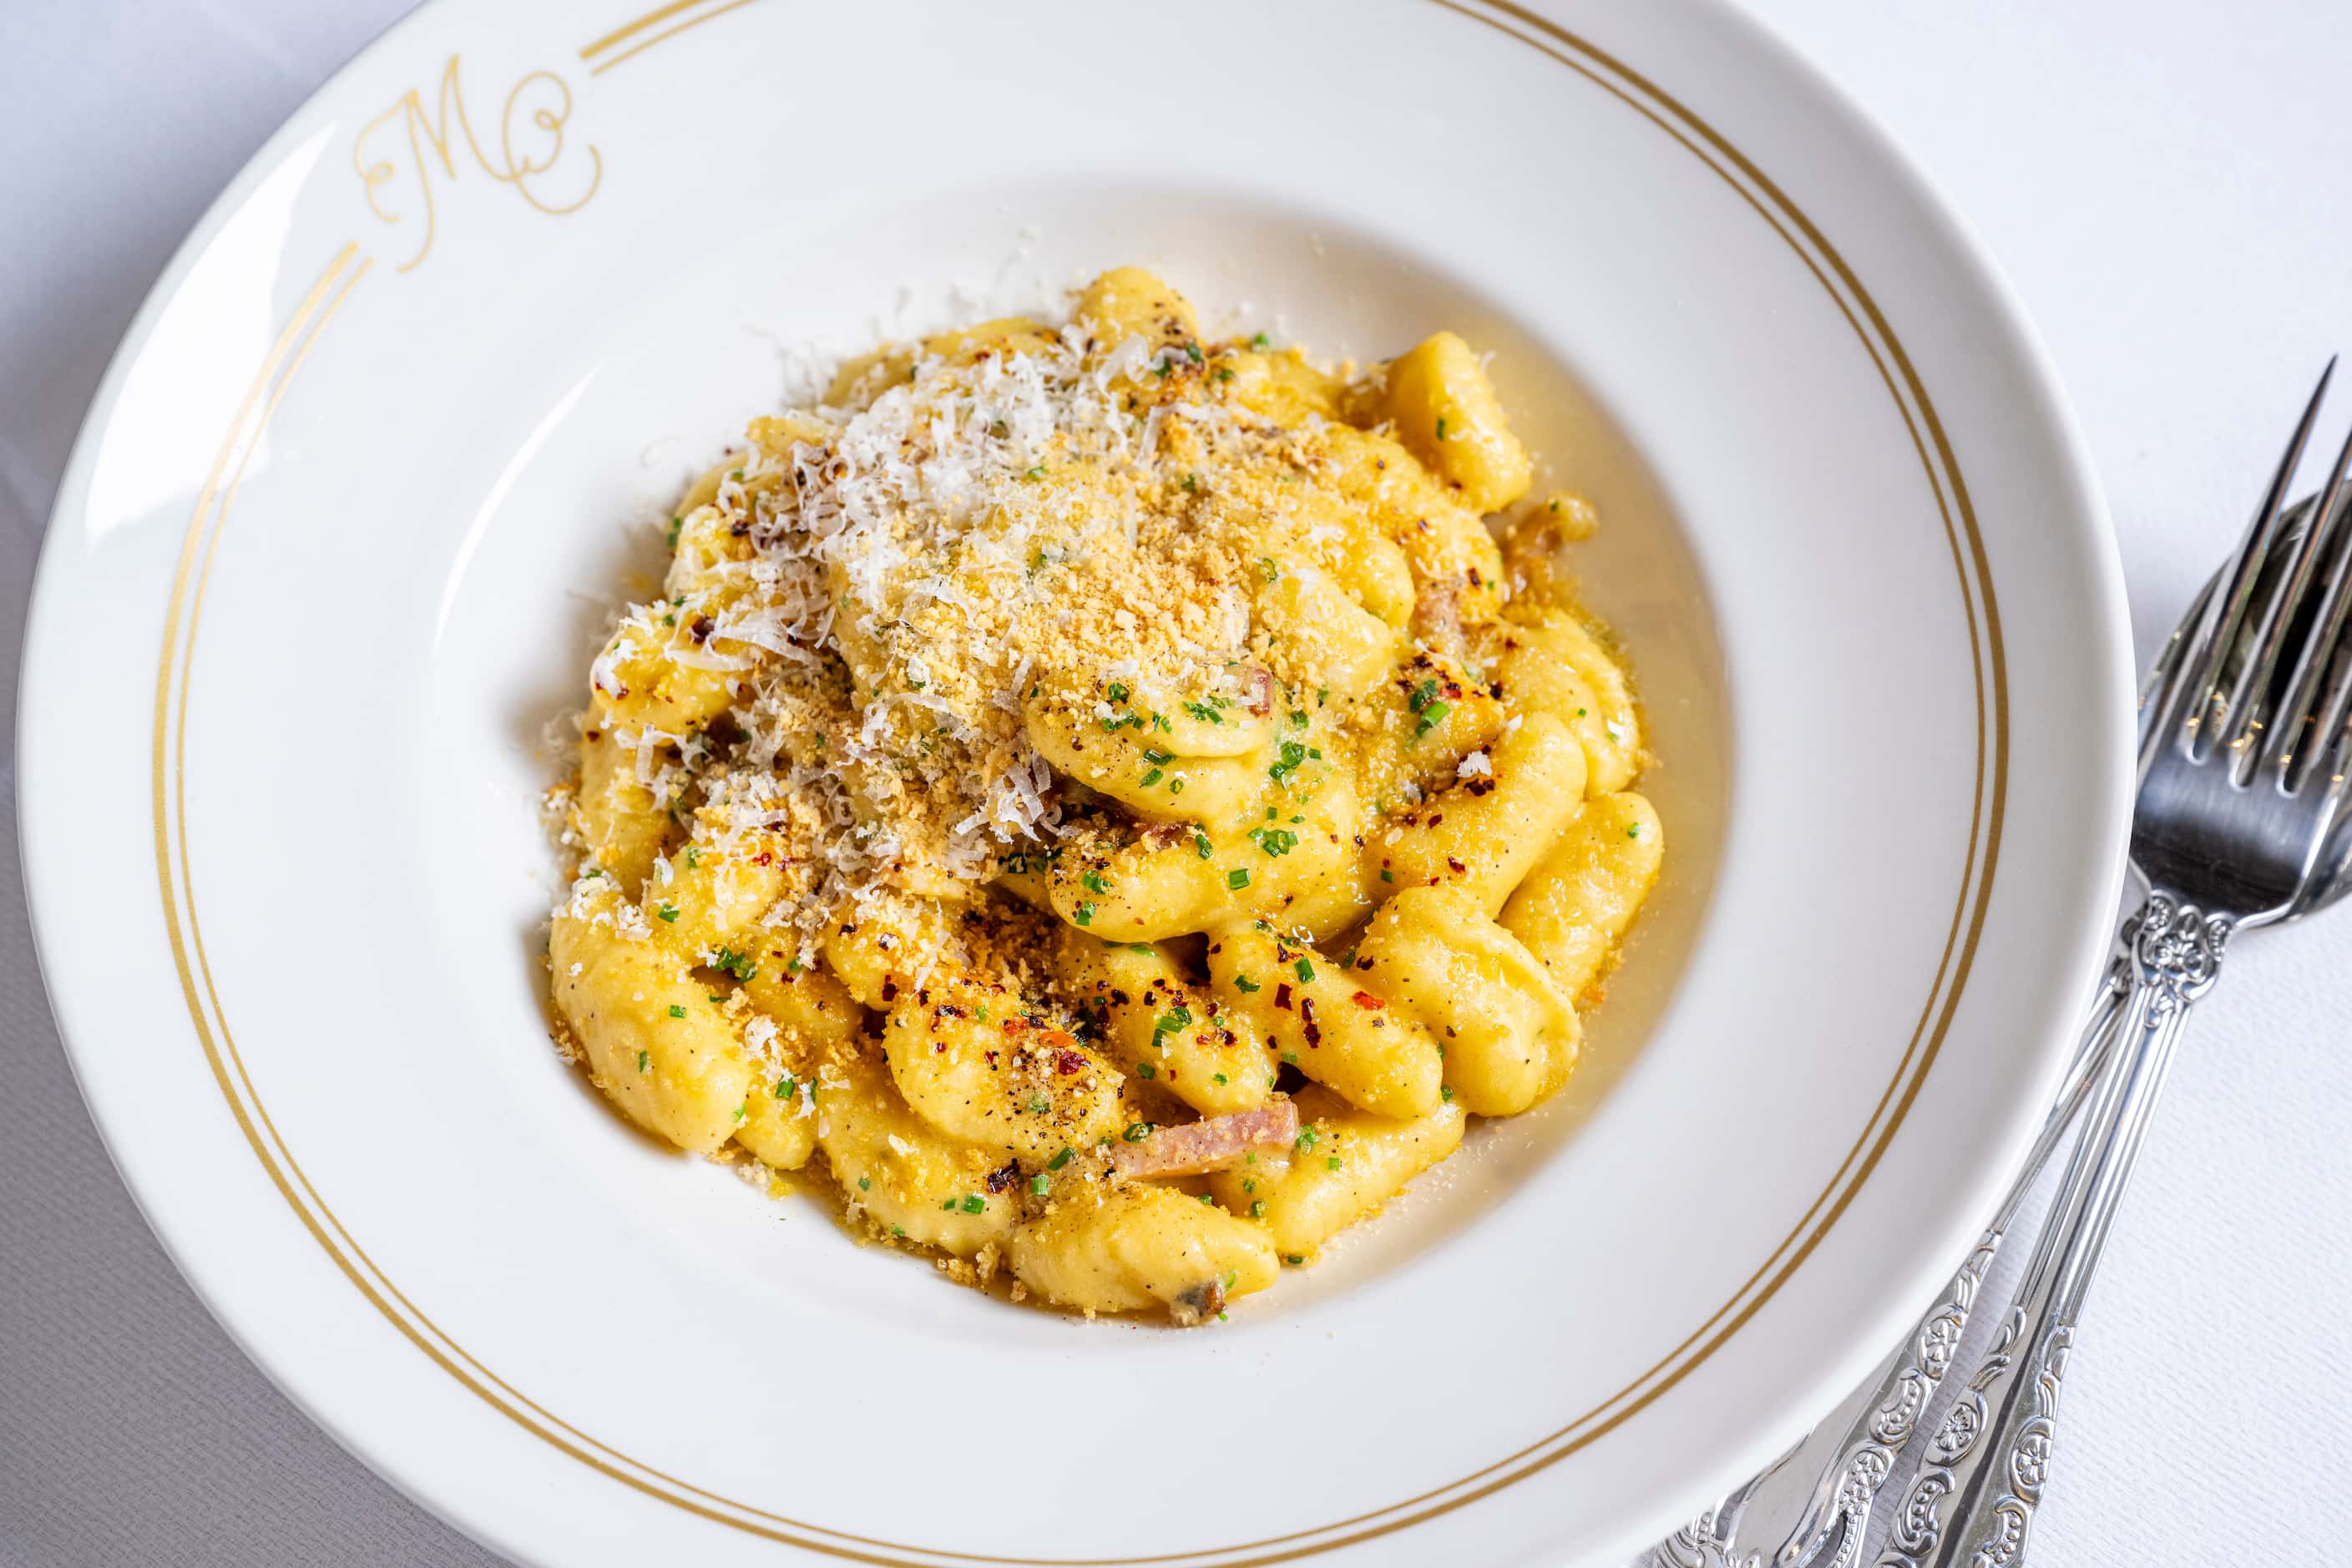 Mister Charles opened July 18, 2023 on Dallas' Knox Street. Uni shells carbonara is one of...